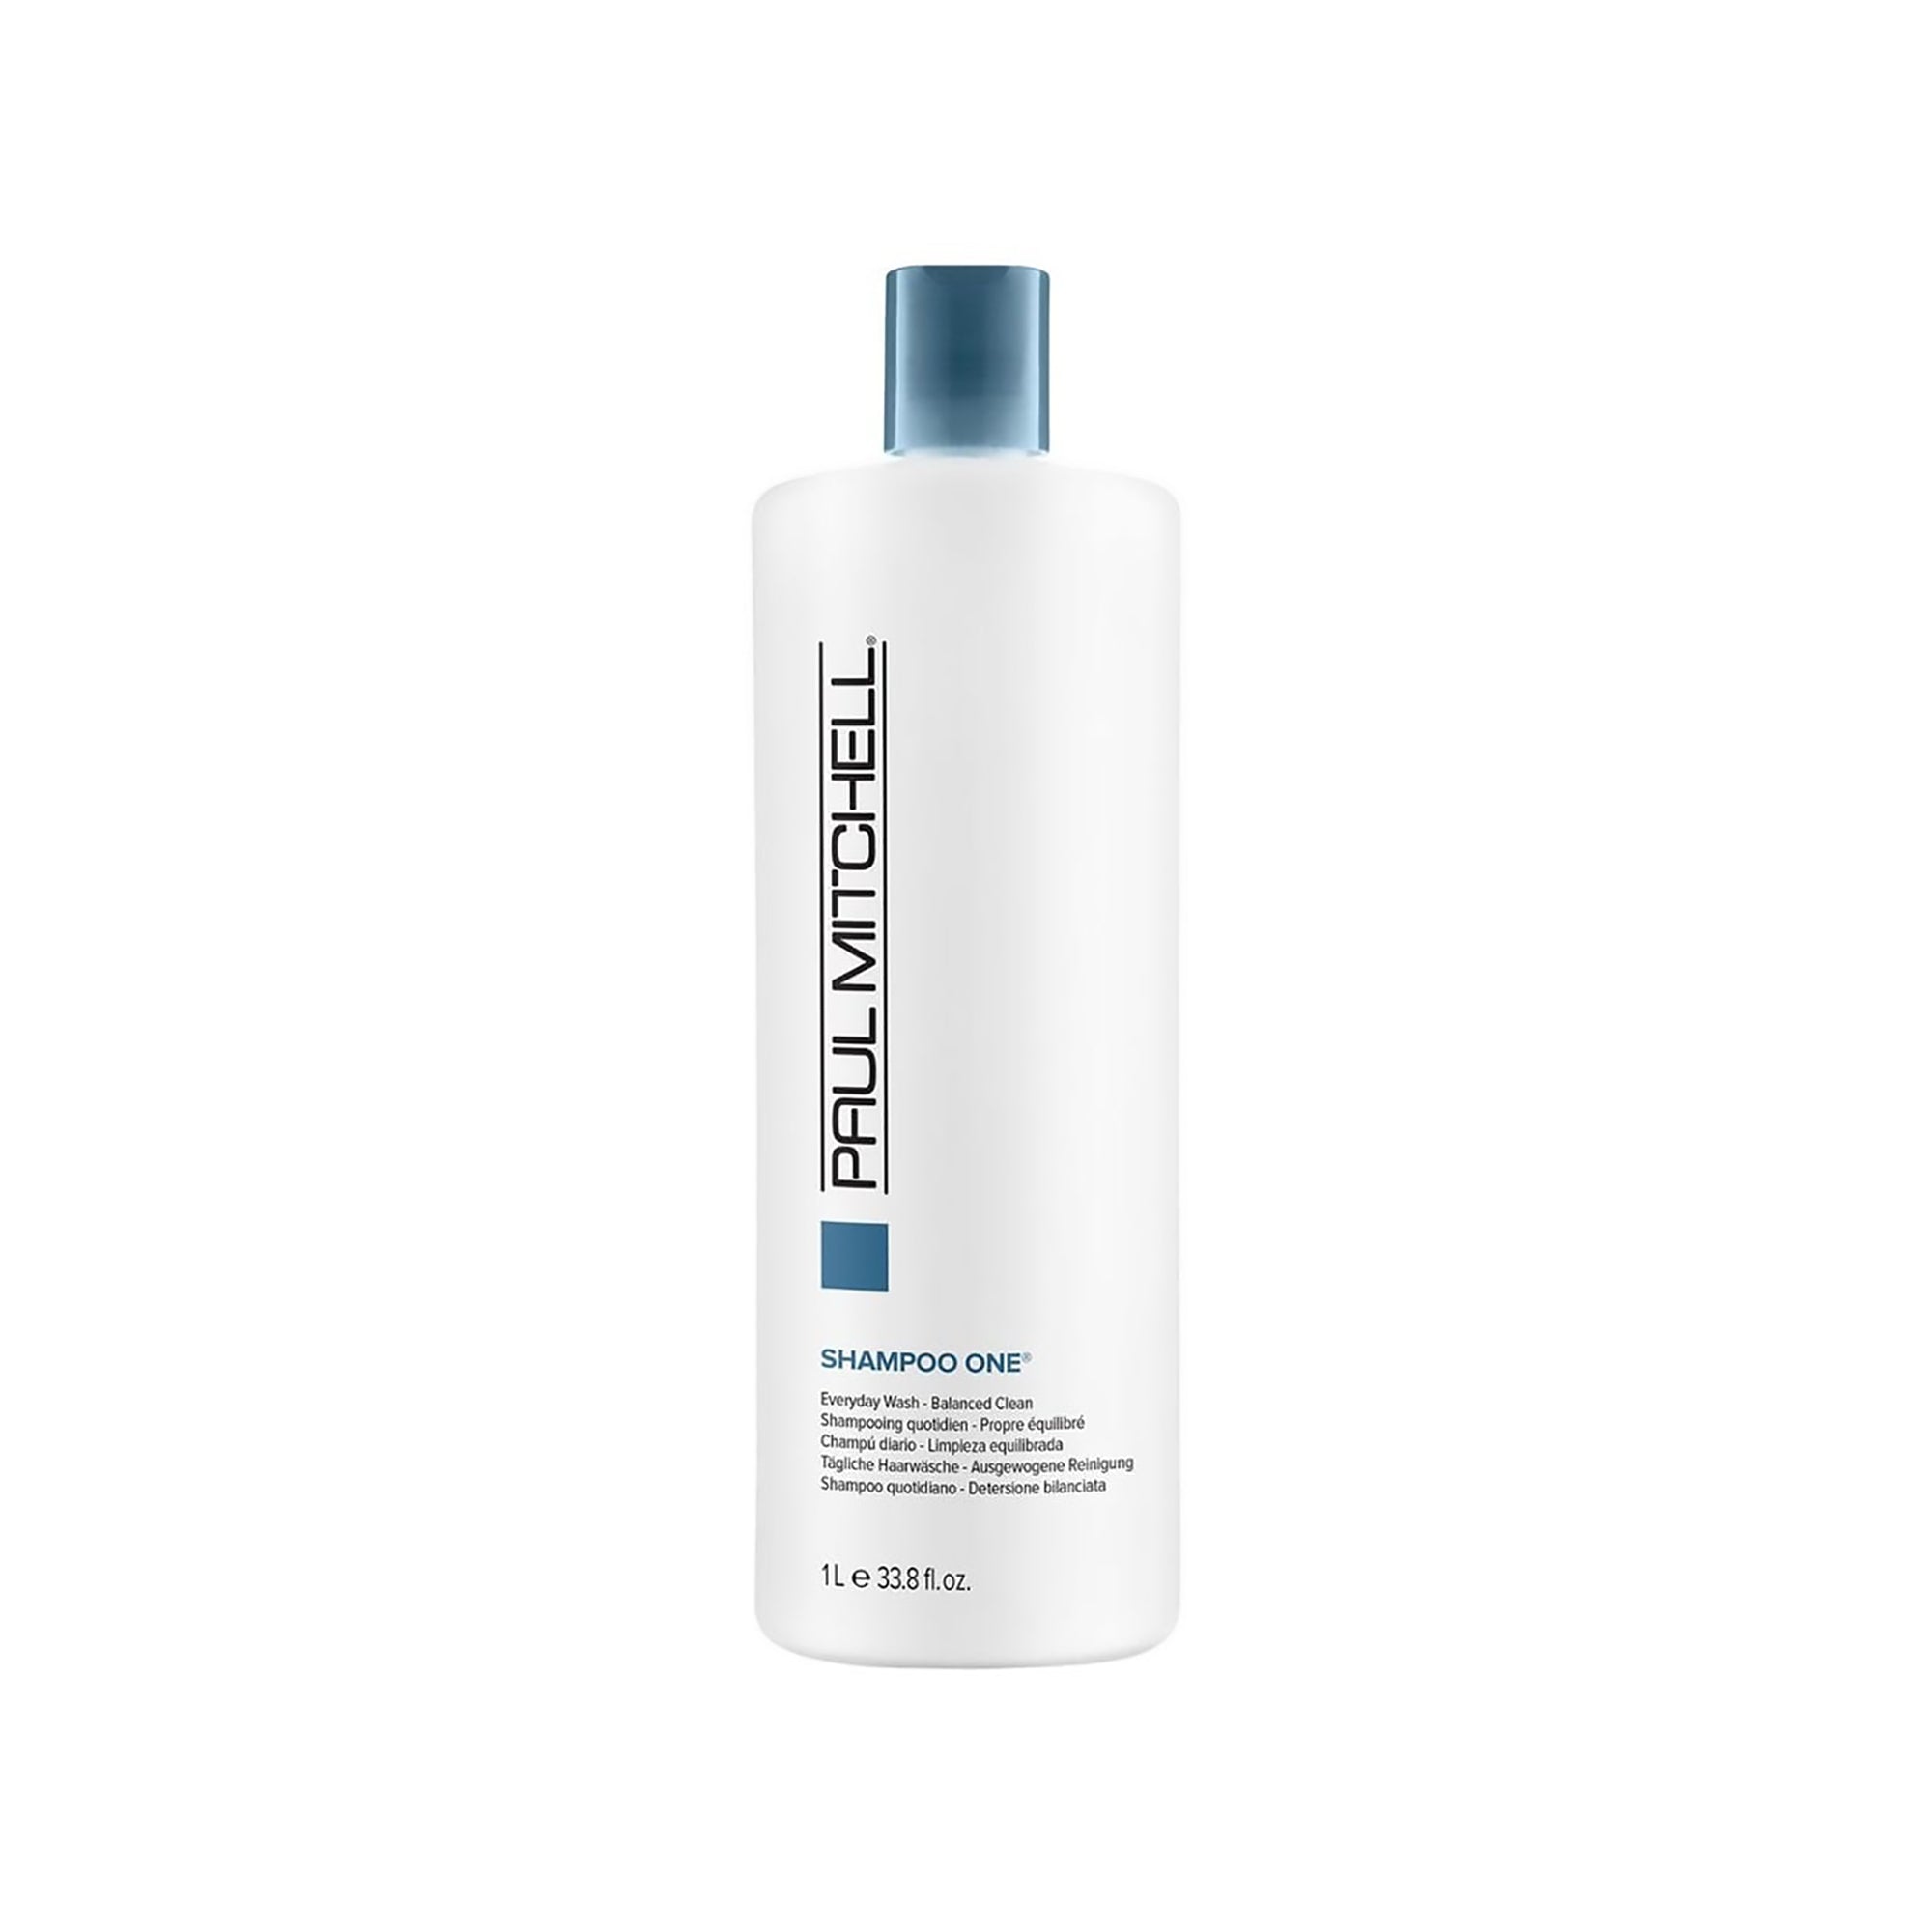 Paul Mitchell Shampoo One and The Conditioner Duo ($64.50 Value) / LITER